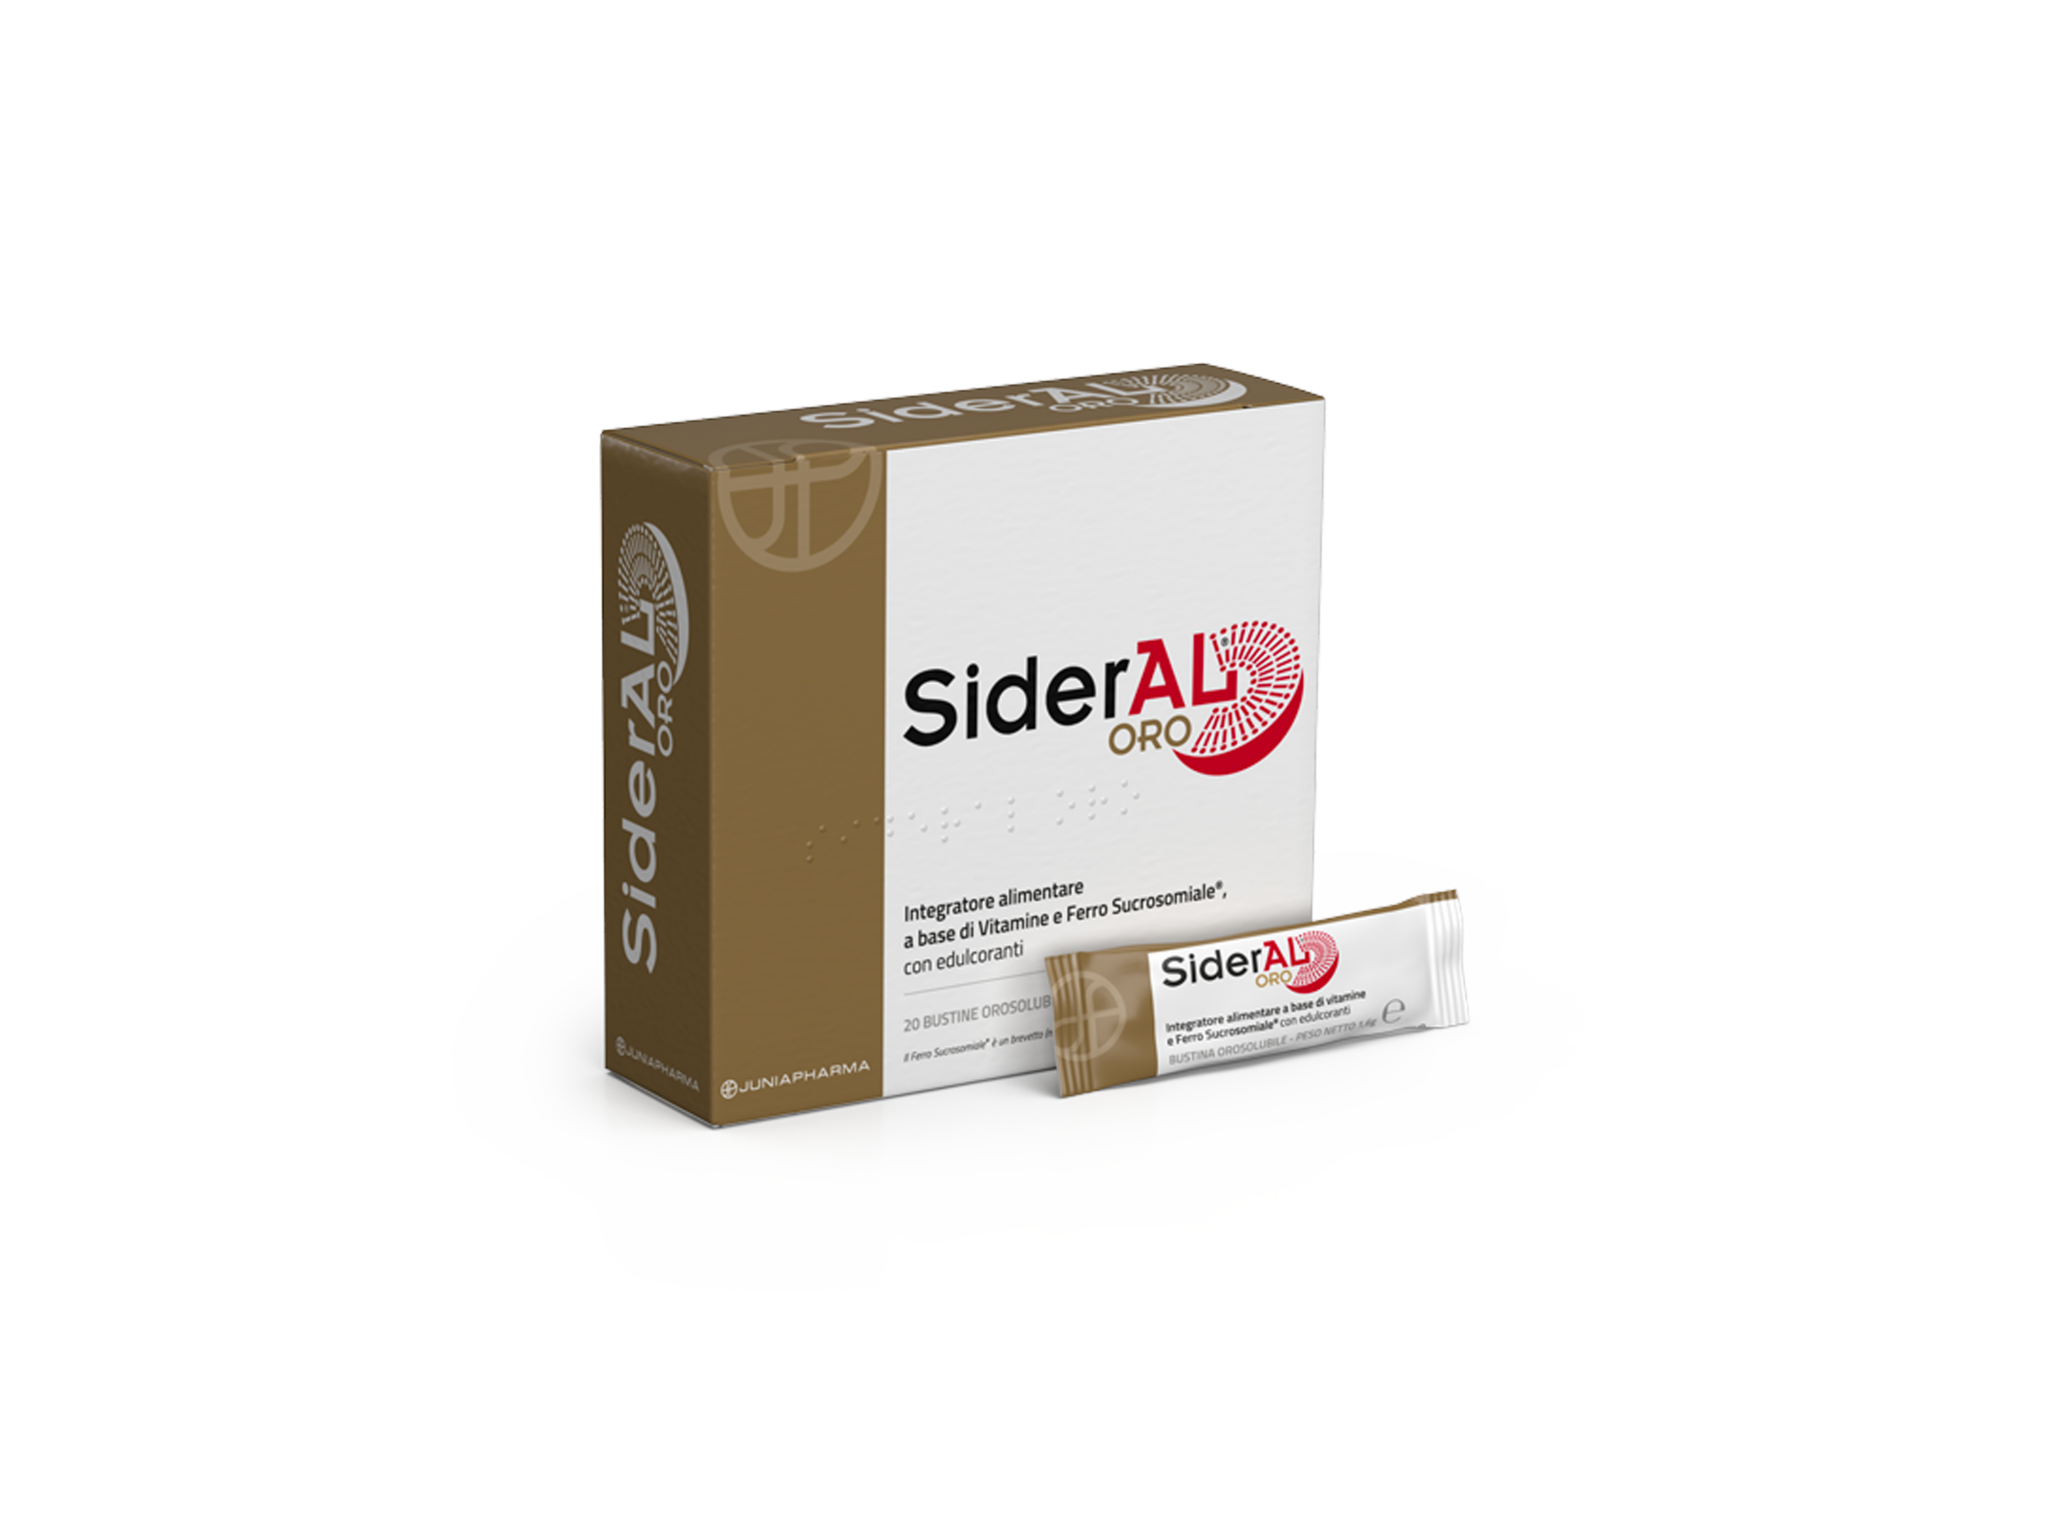 SiderAL® Oro